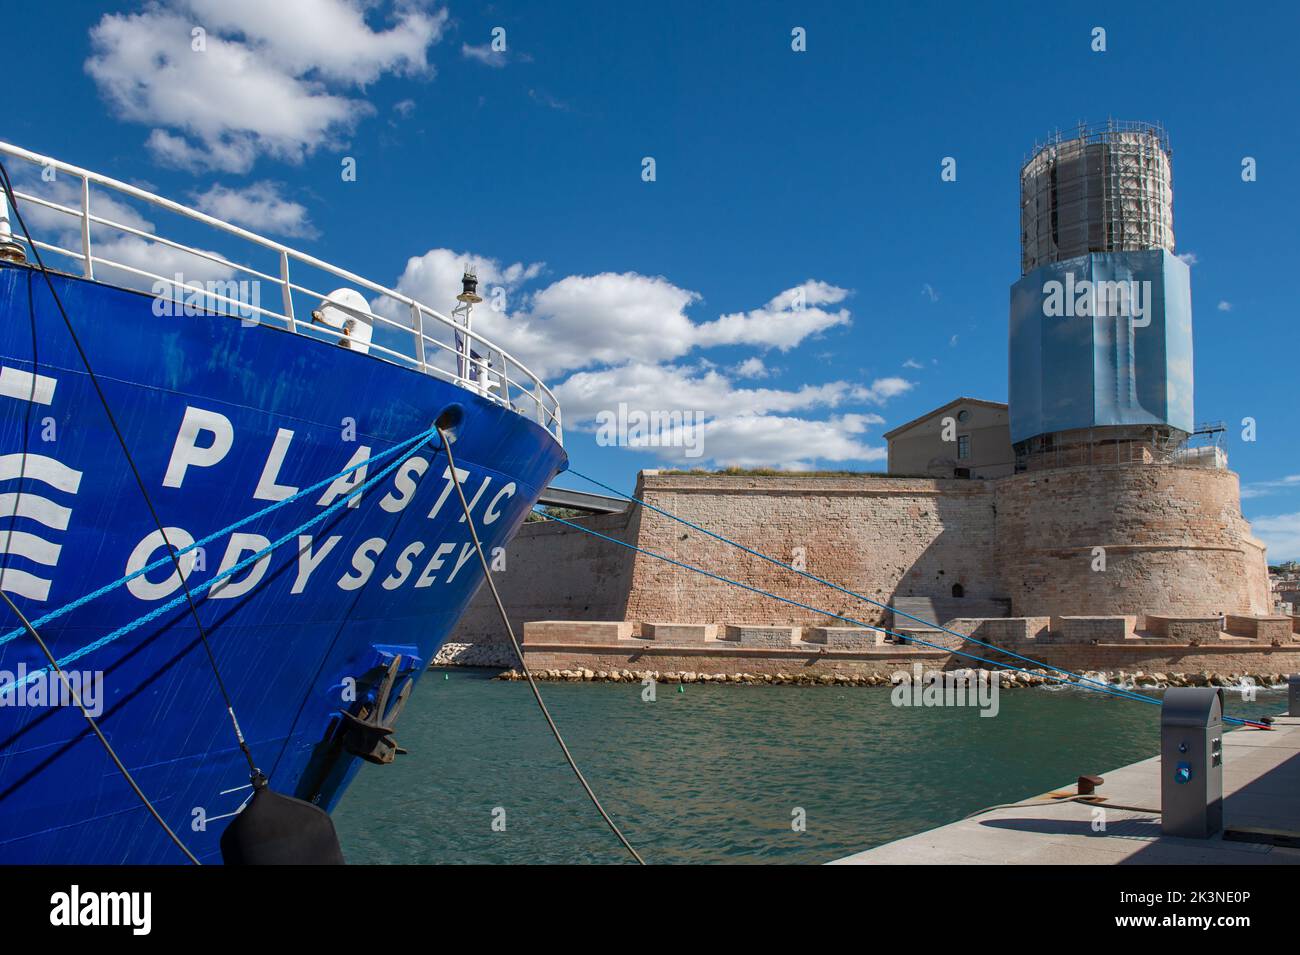 The boat Plastic Odyssey, moored in the basin of the Mucem in Marseille. Plastic Odyssey is launching a mission to explore the areas most affected by plastic pollution to gather, develop and disseminate solutions. The departure of the ship for a three-year mission with 30 countries visited is scheduled for October 01, 2022. Stock Photo